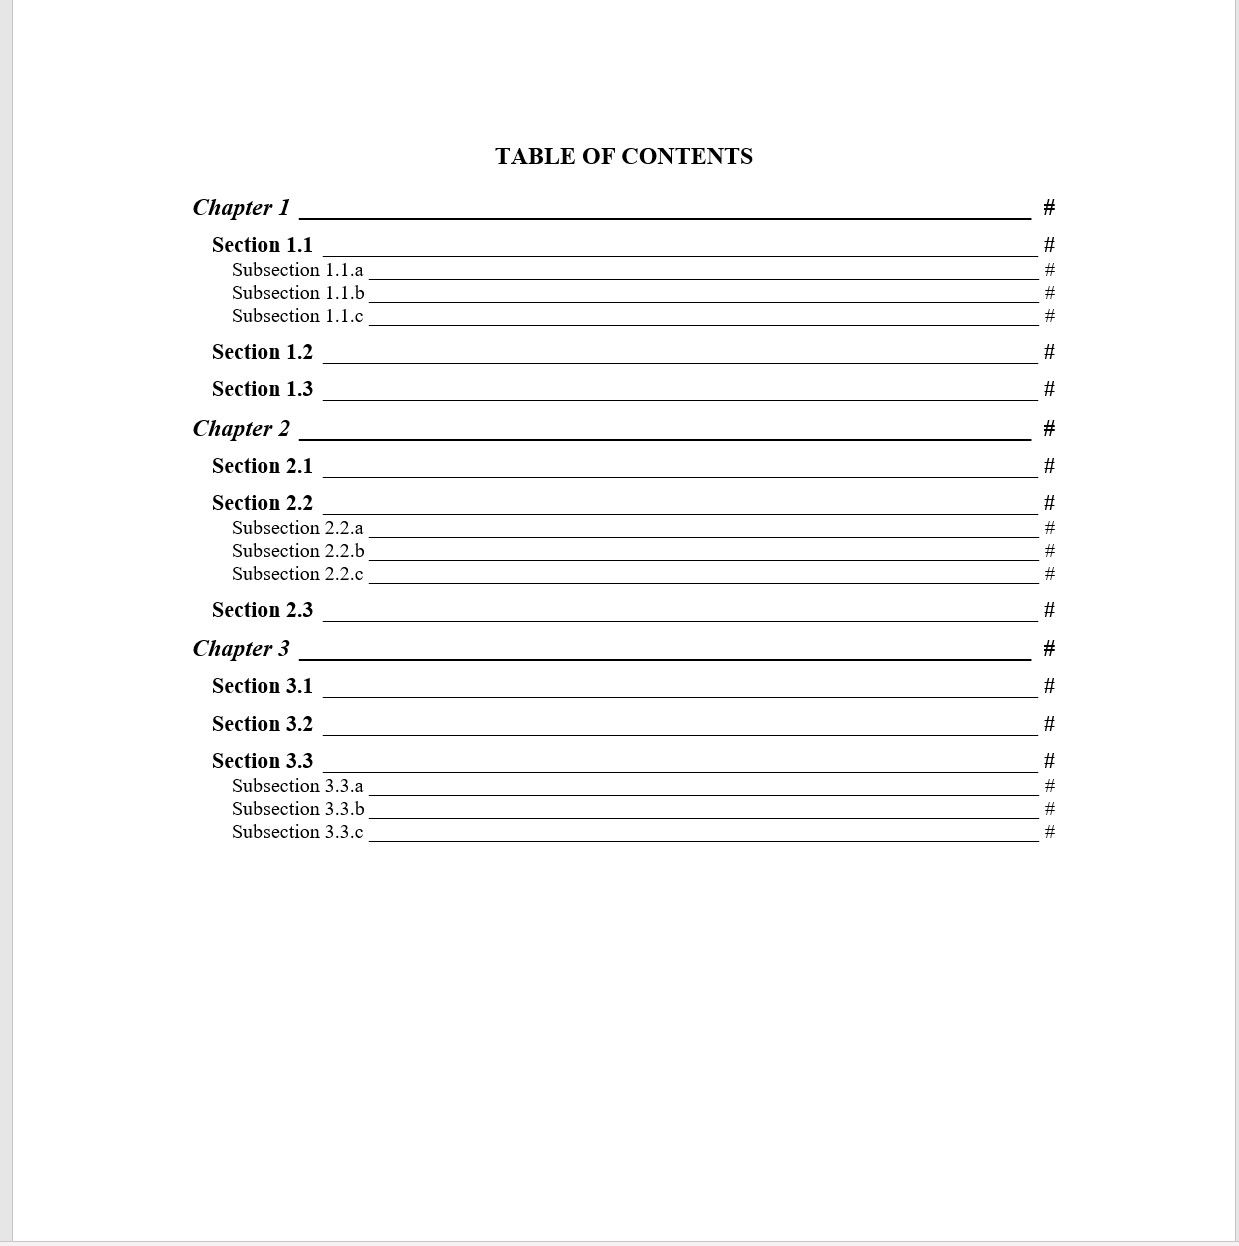 formatted table of contents in Microsoft Word